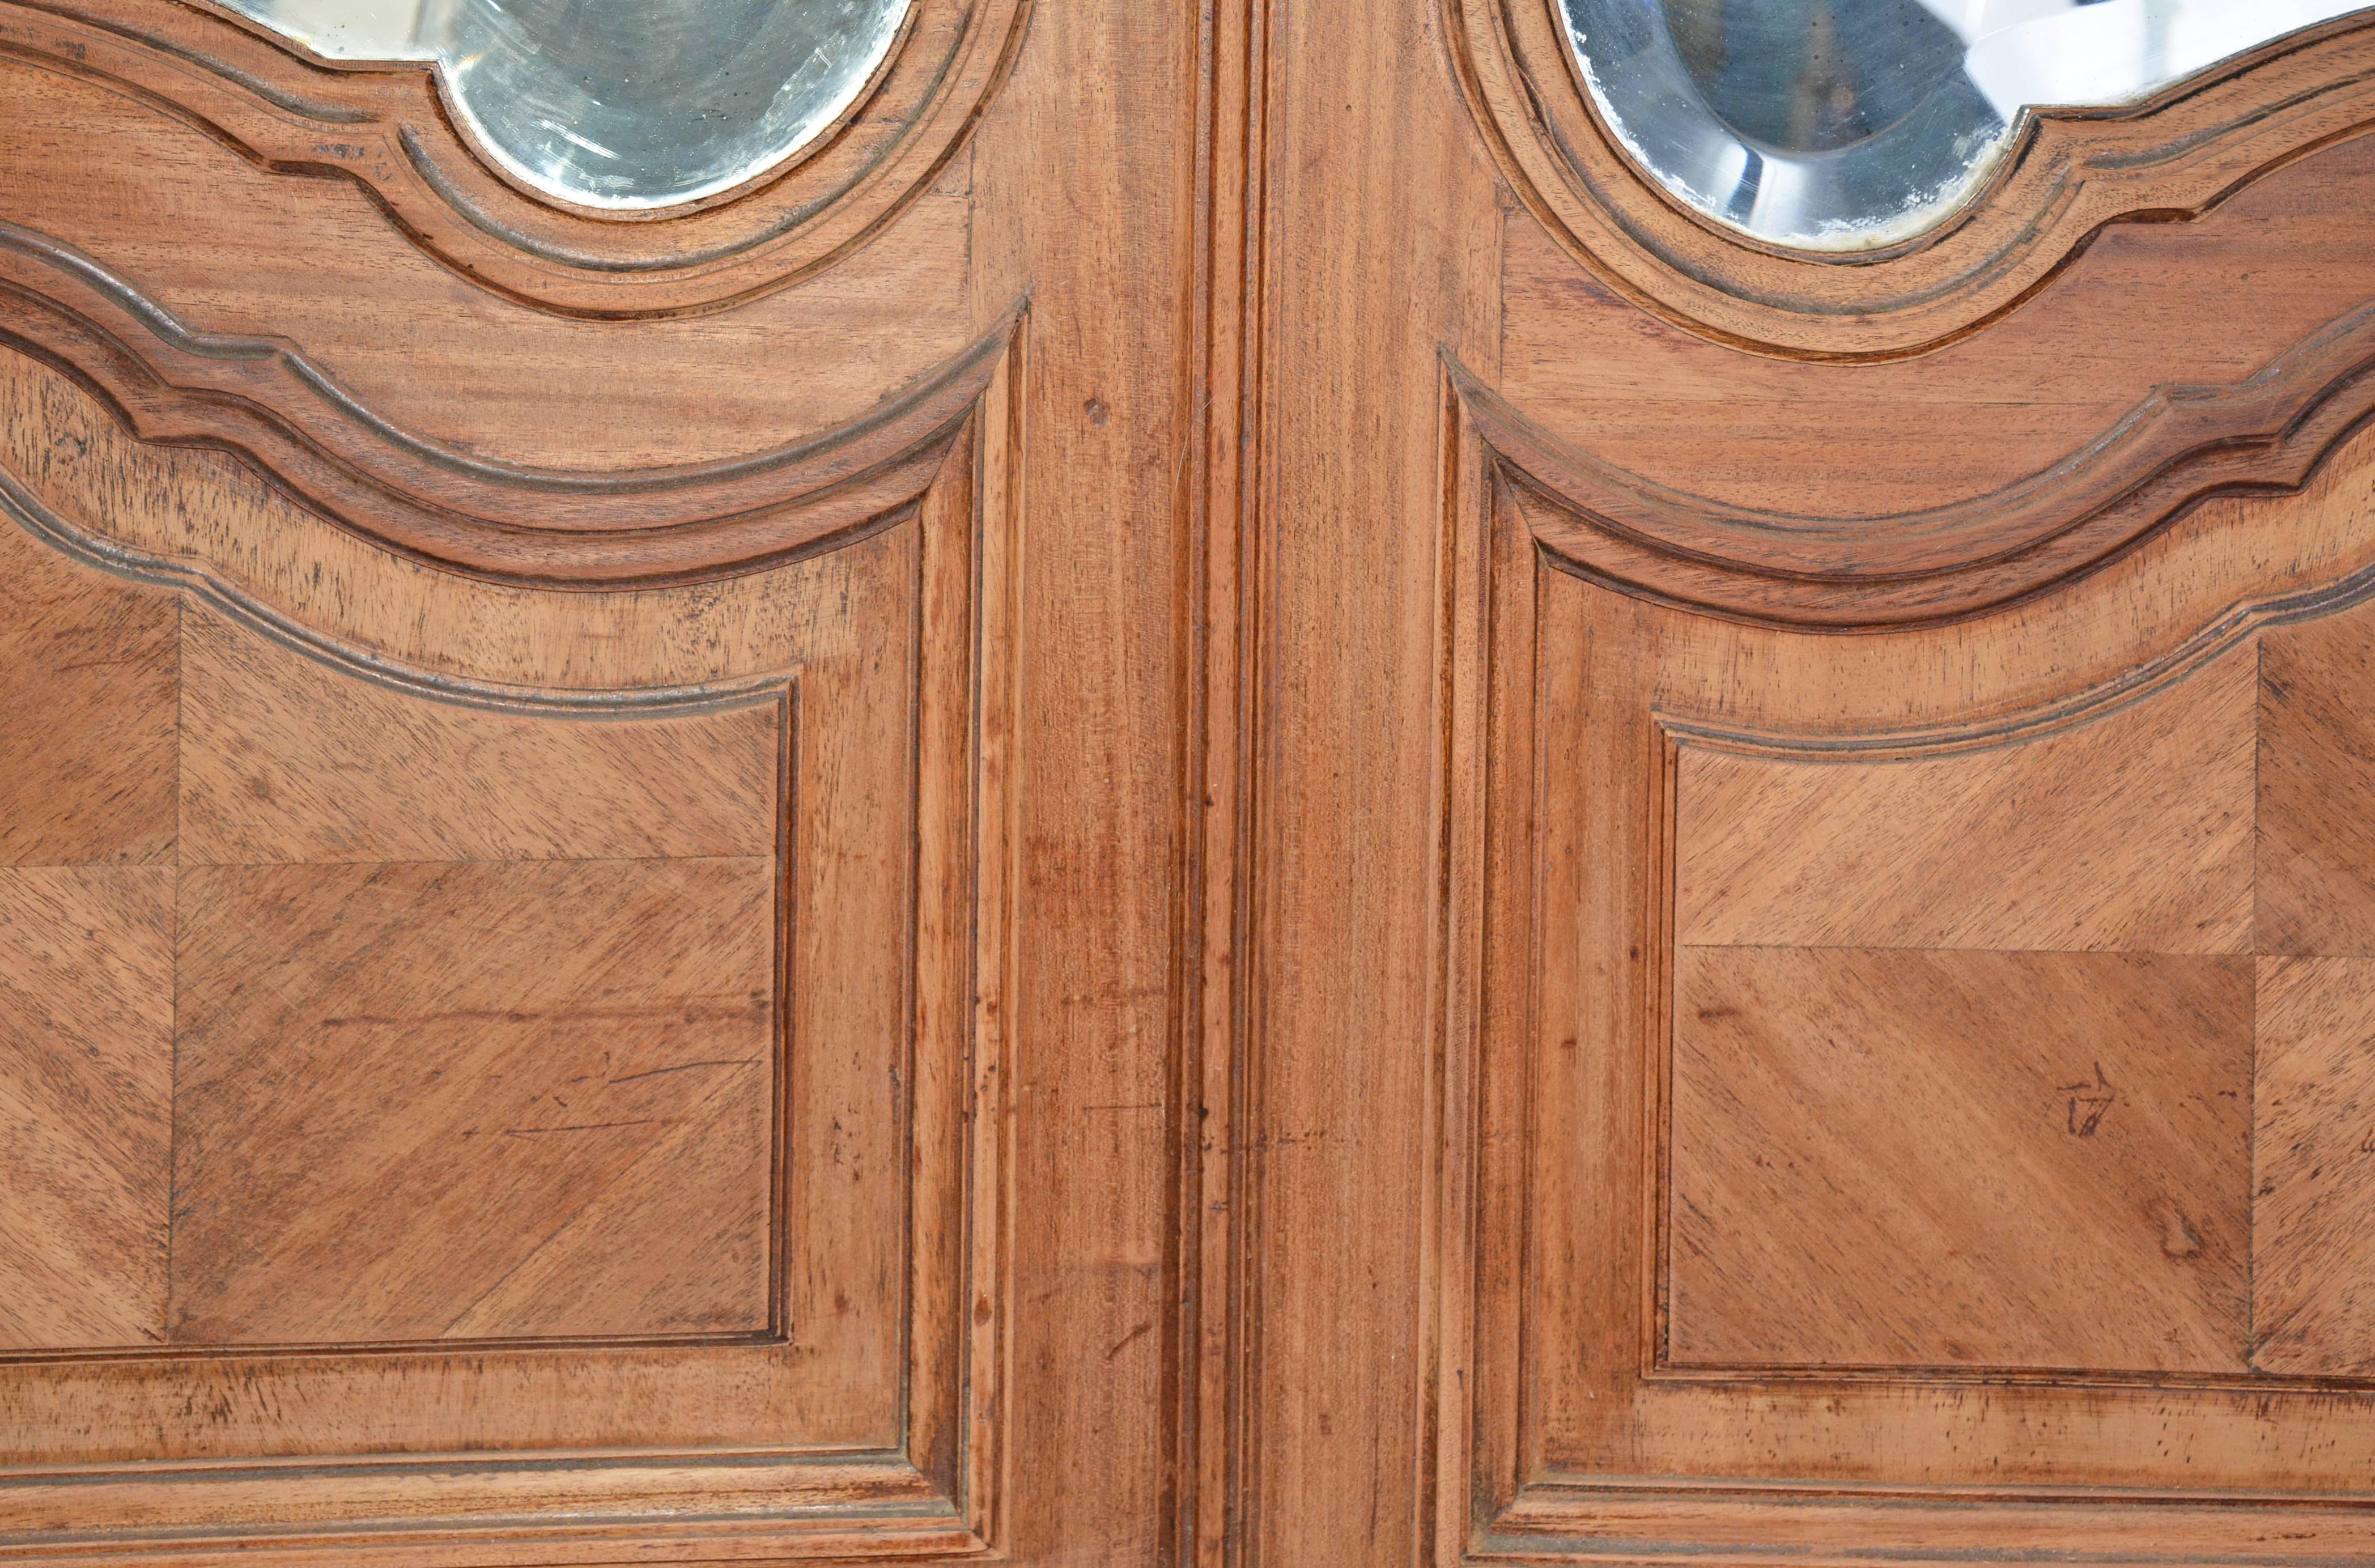 The pair of 19th century French Rococo mirrored doors can be used for dressing room closet or cupboard doors. Beautiful inset paneling, Rococo lock escutcheons and bevelled mirrors are part of the design.